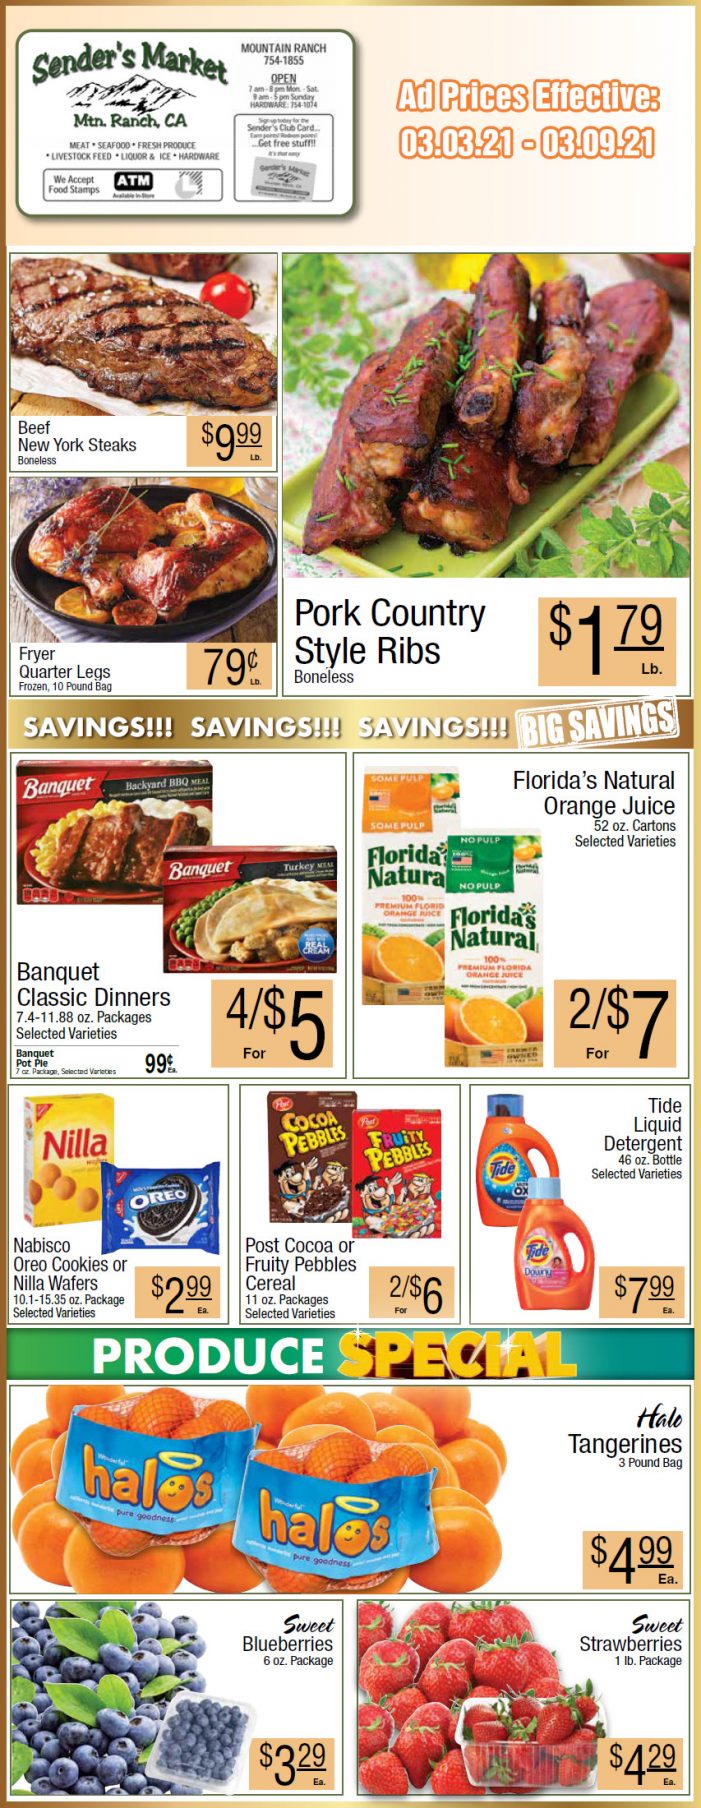 Sender’s Market’s Weekly Ad & Grocery Specials Through March 9th.  Shop Local & Save!